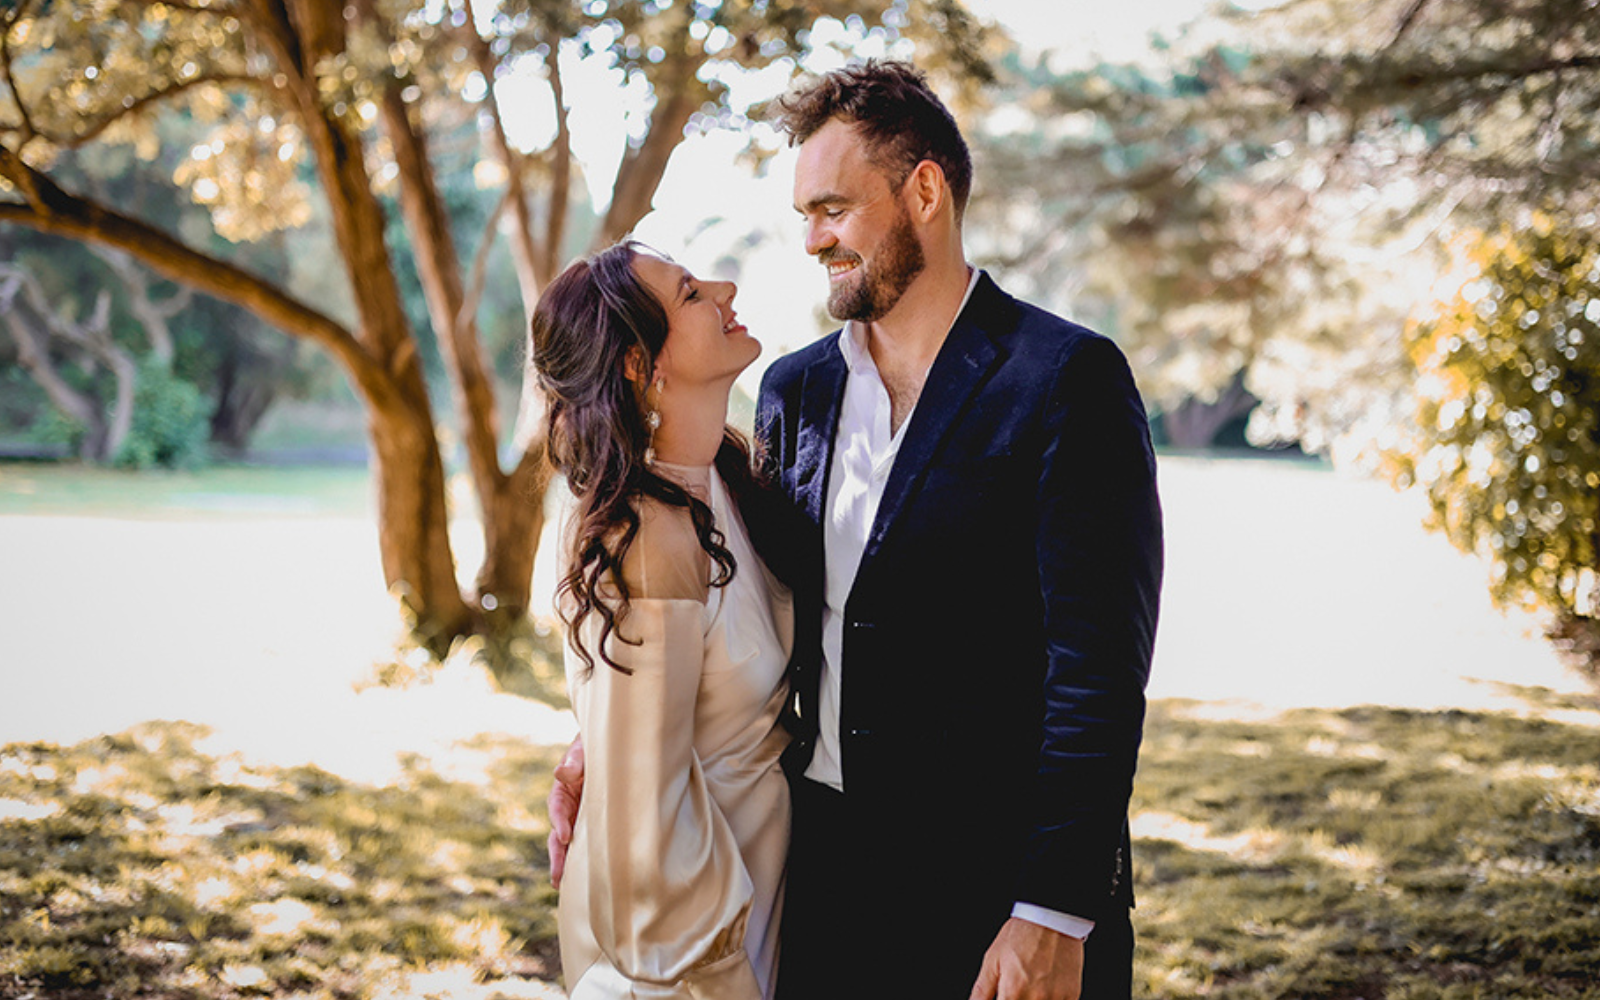 This Kāpiti couple planned their wedding in 48 hours!